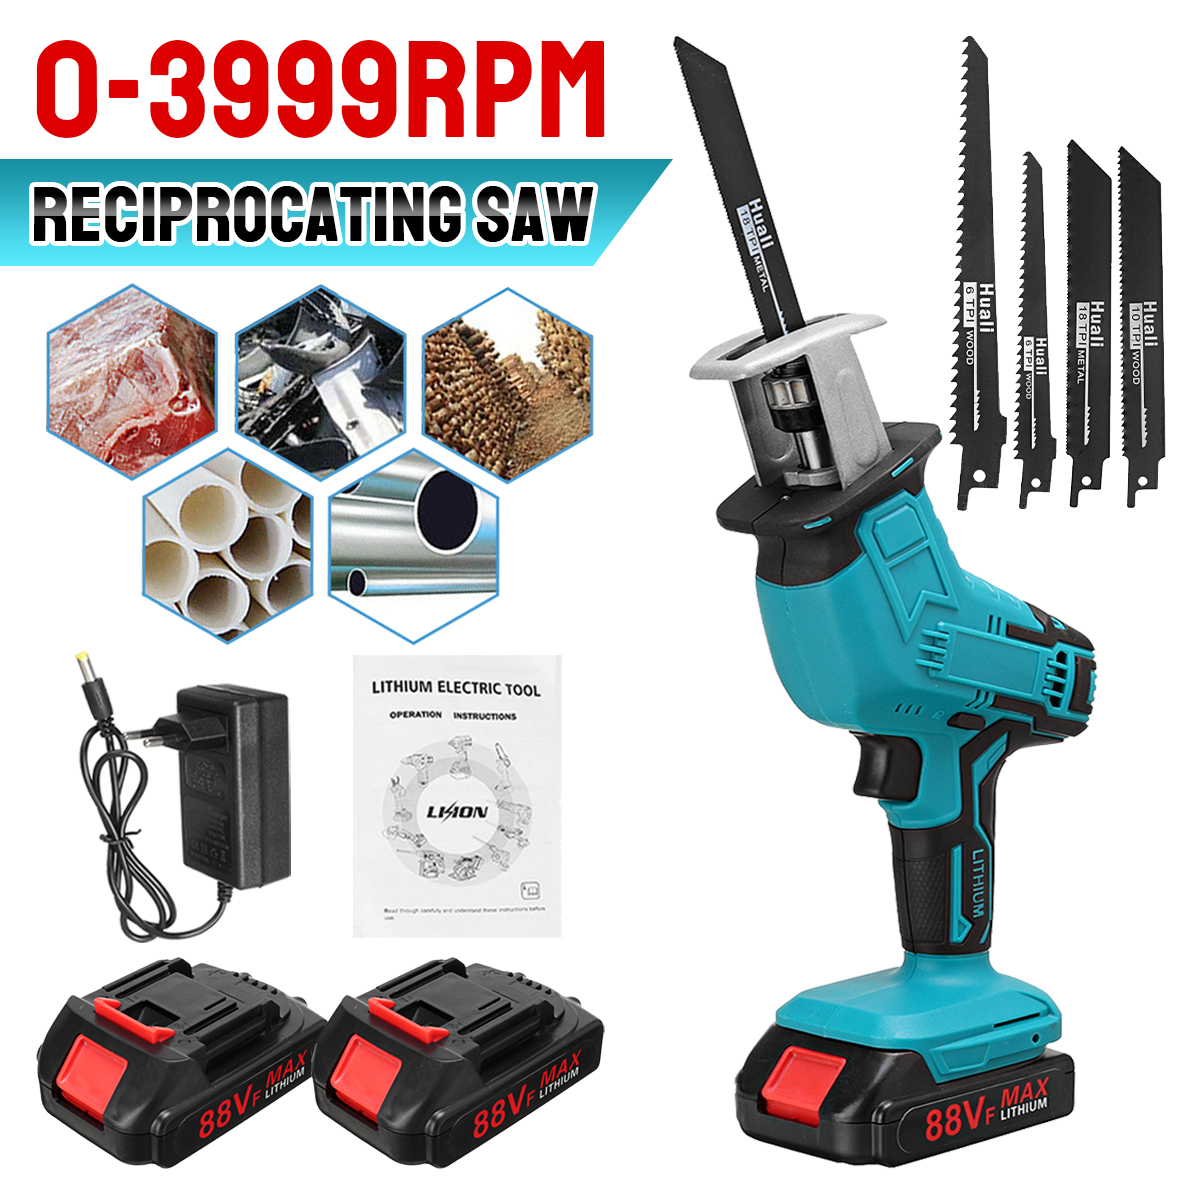 Cordless-Reciprocating-Saw-Woodworking-Wood-Cutter-Electric-Saw-W-None4-Saw-Blades--None12-Battery-C-1873530-2